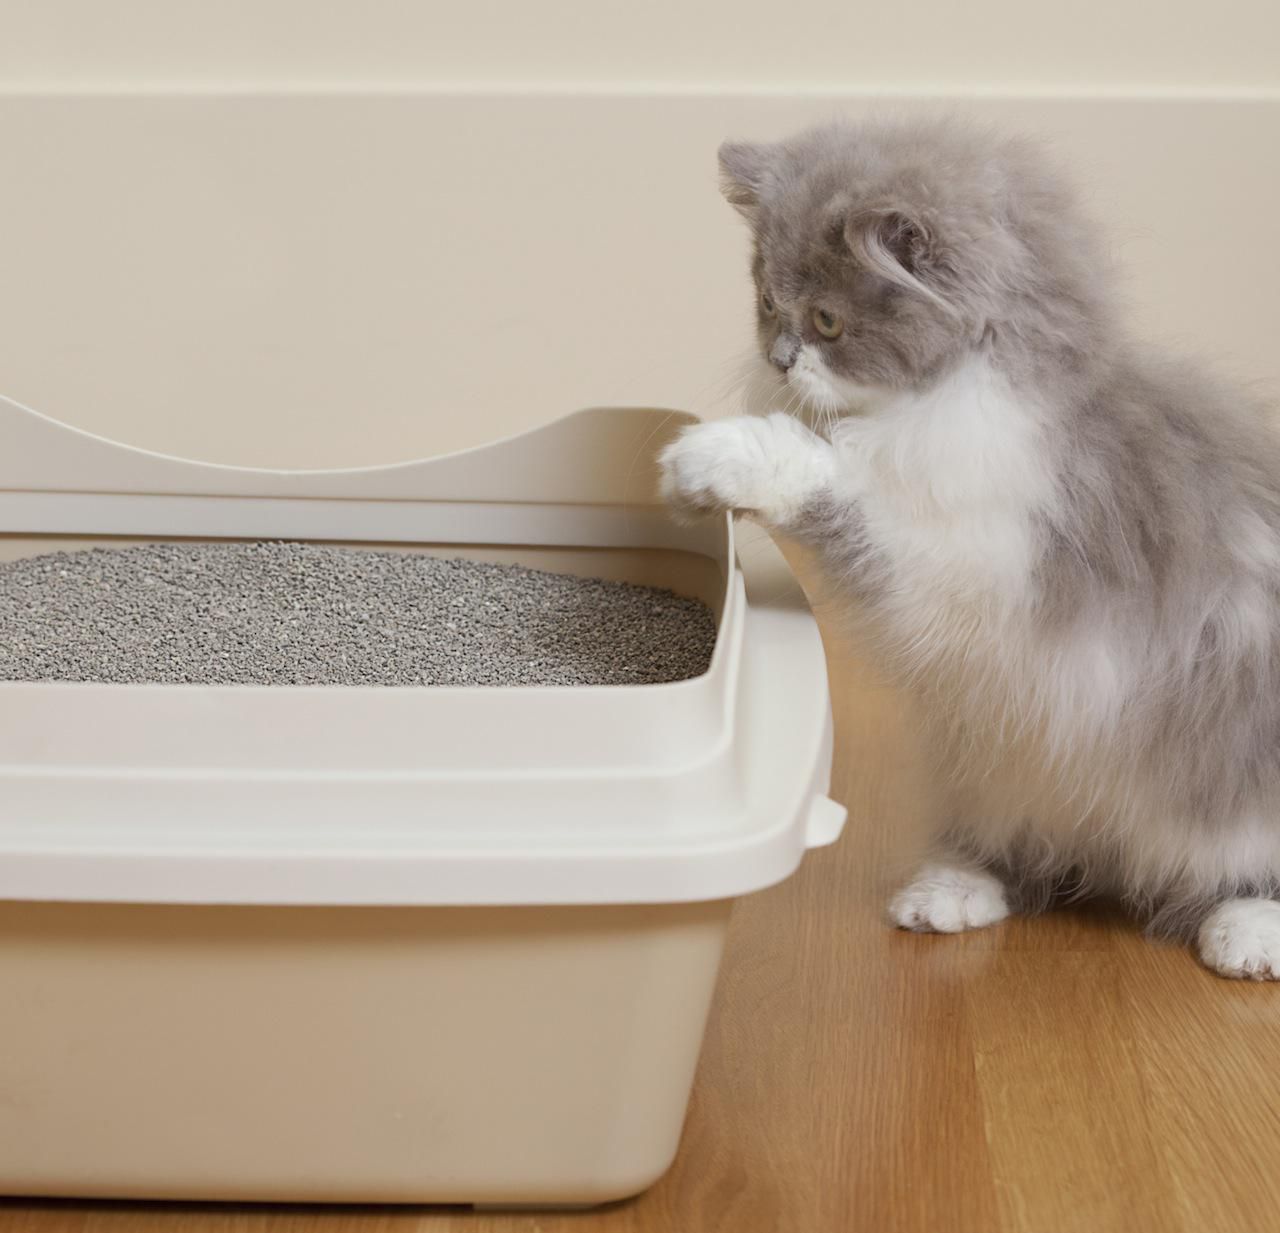 What to Do When a Cat Goes Outside the Litter Box